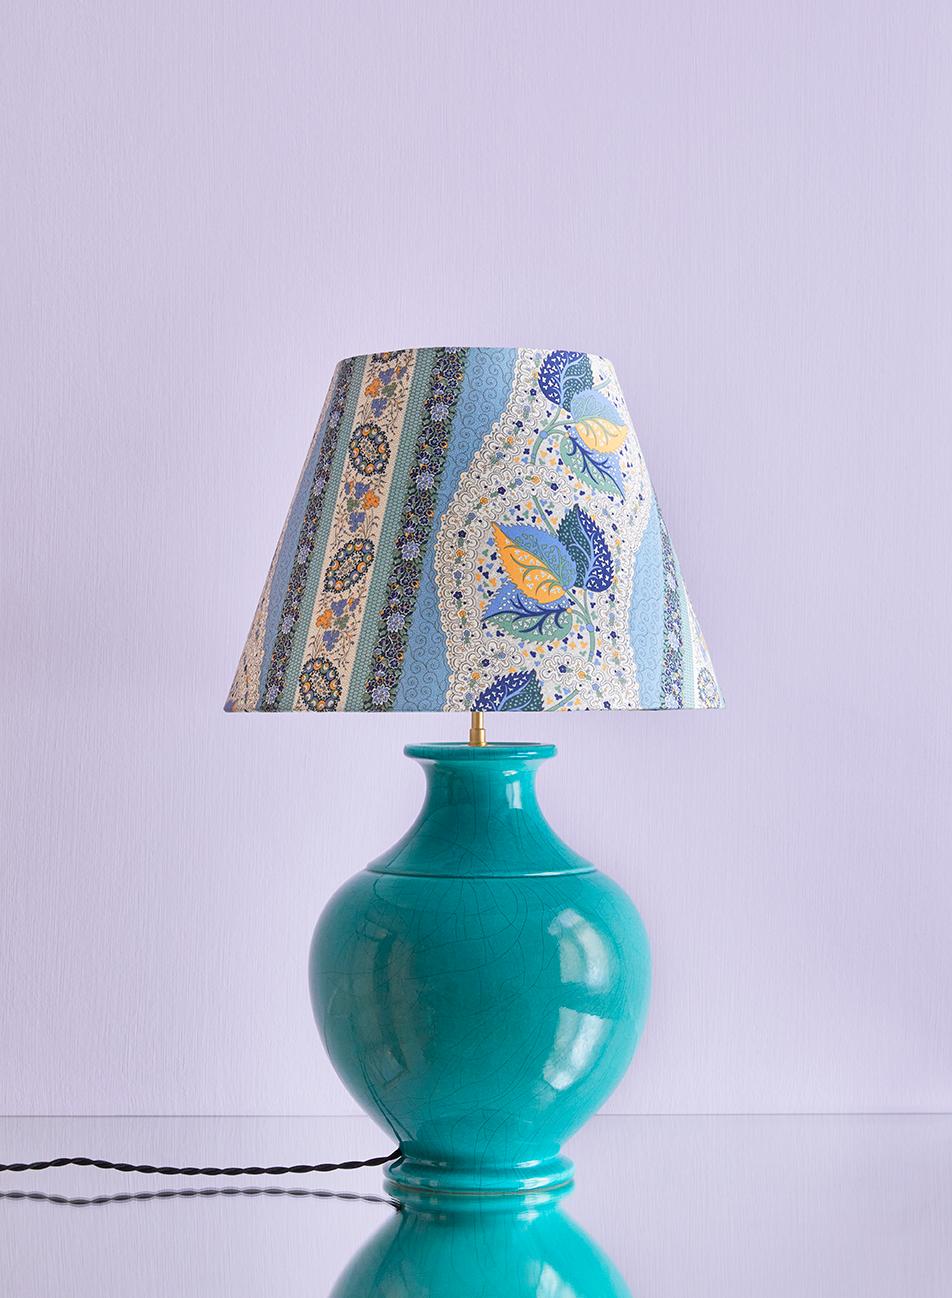 France, 1980's

Ceramic table lamp in green glaze with customized shade by The Apartment.

Measures: H 60 x Ø 36 cm.